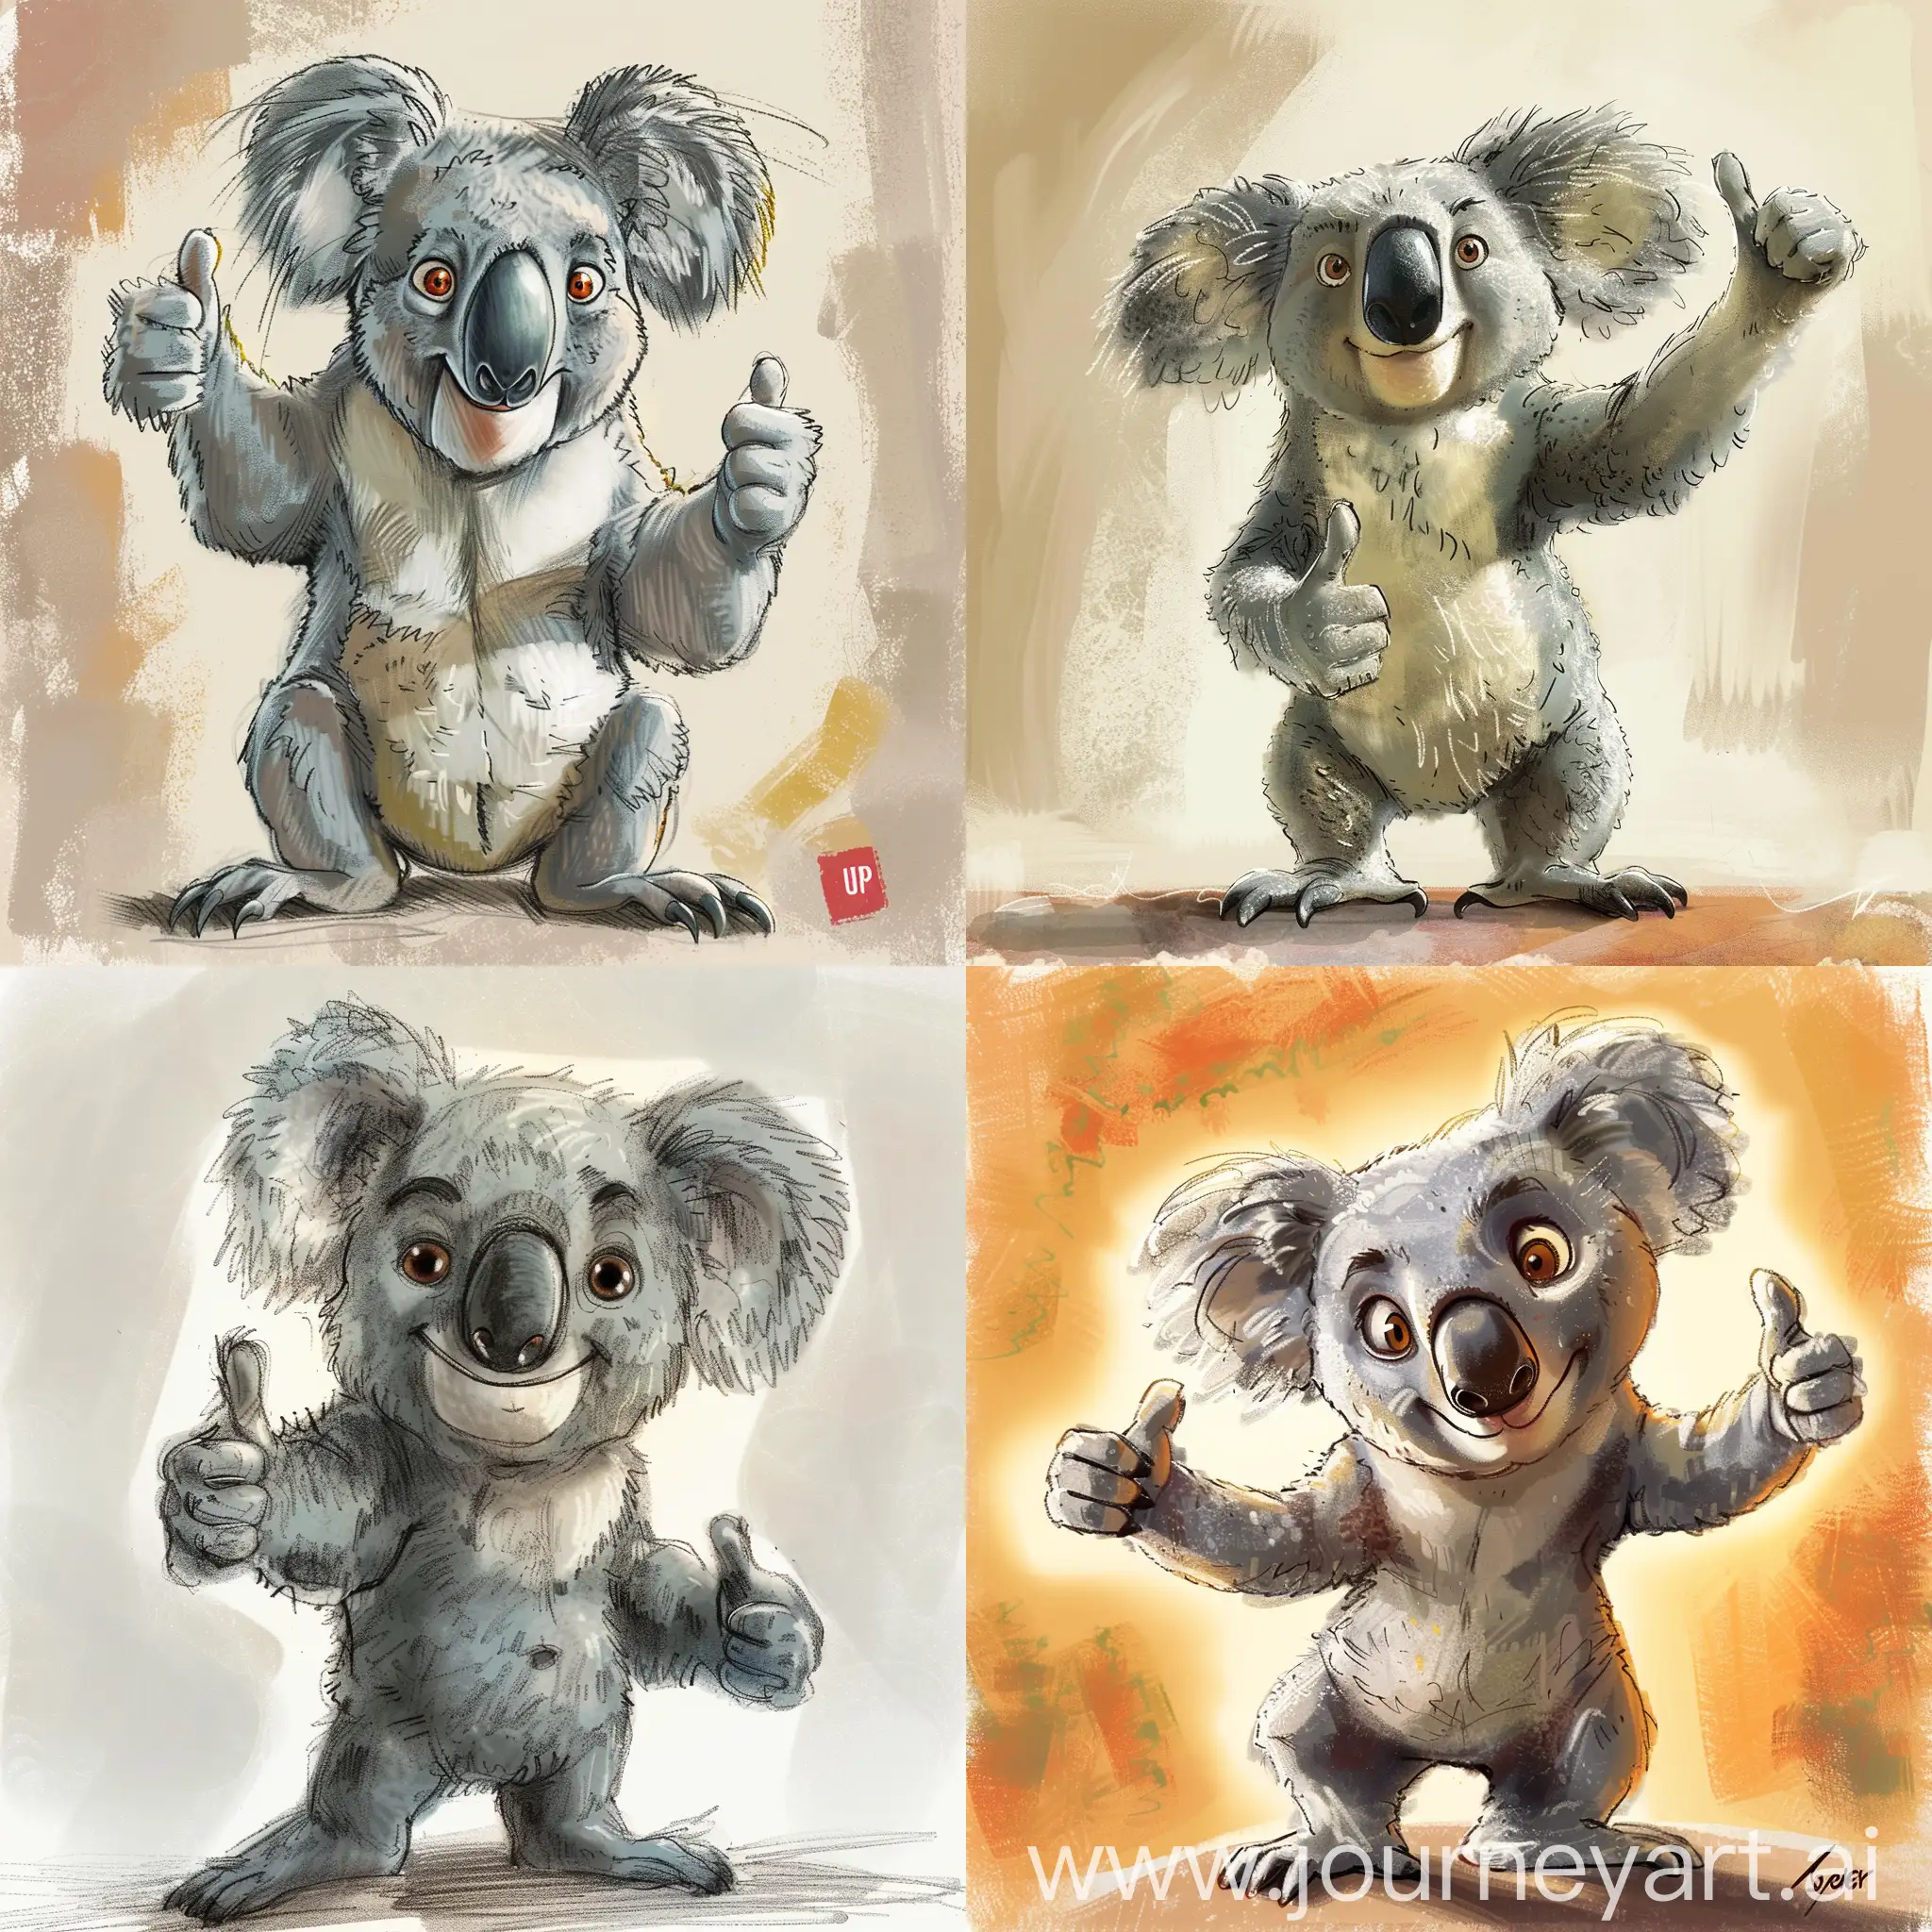 Pixar-Style-Koala-Giving-Thumbs-Up-in-Bayer-Form